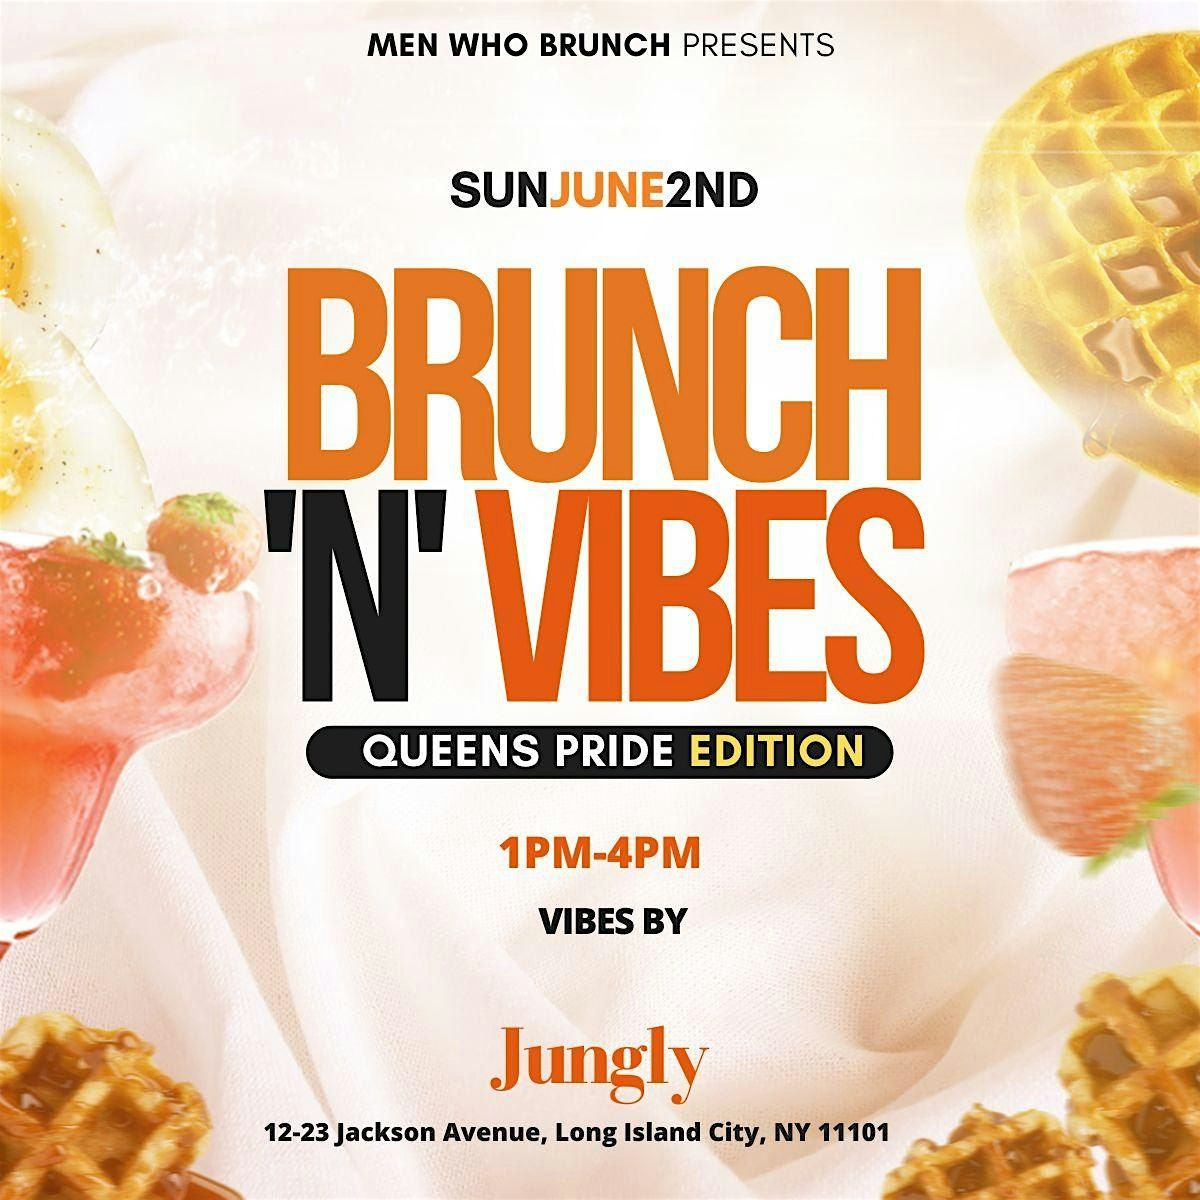 Brunch N Vibes- Queens Pride Edition